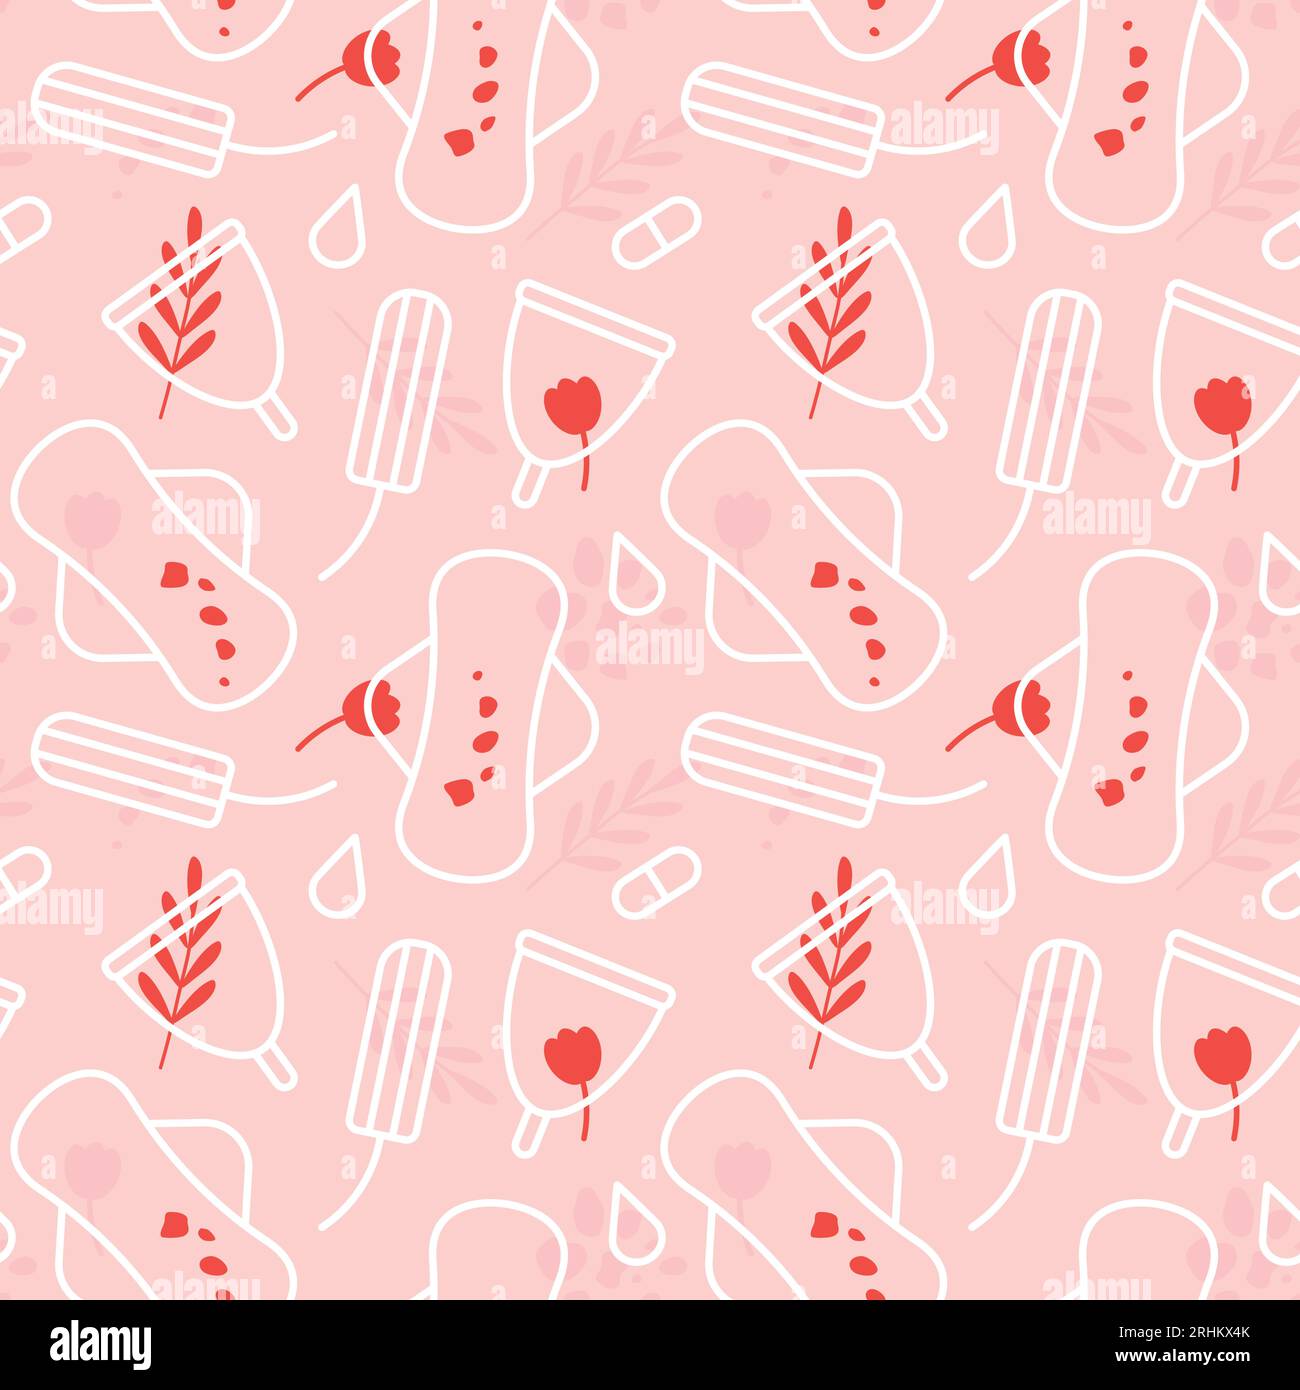 Seamless Menstruation Pattern With Different Menstrual Hygiene Products And Floral Elements 0783